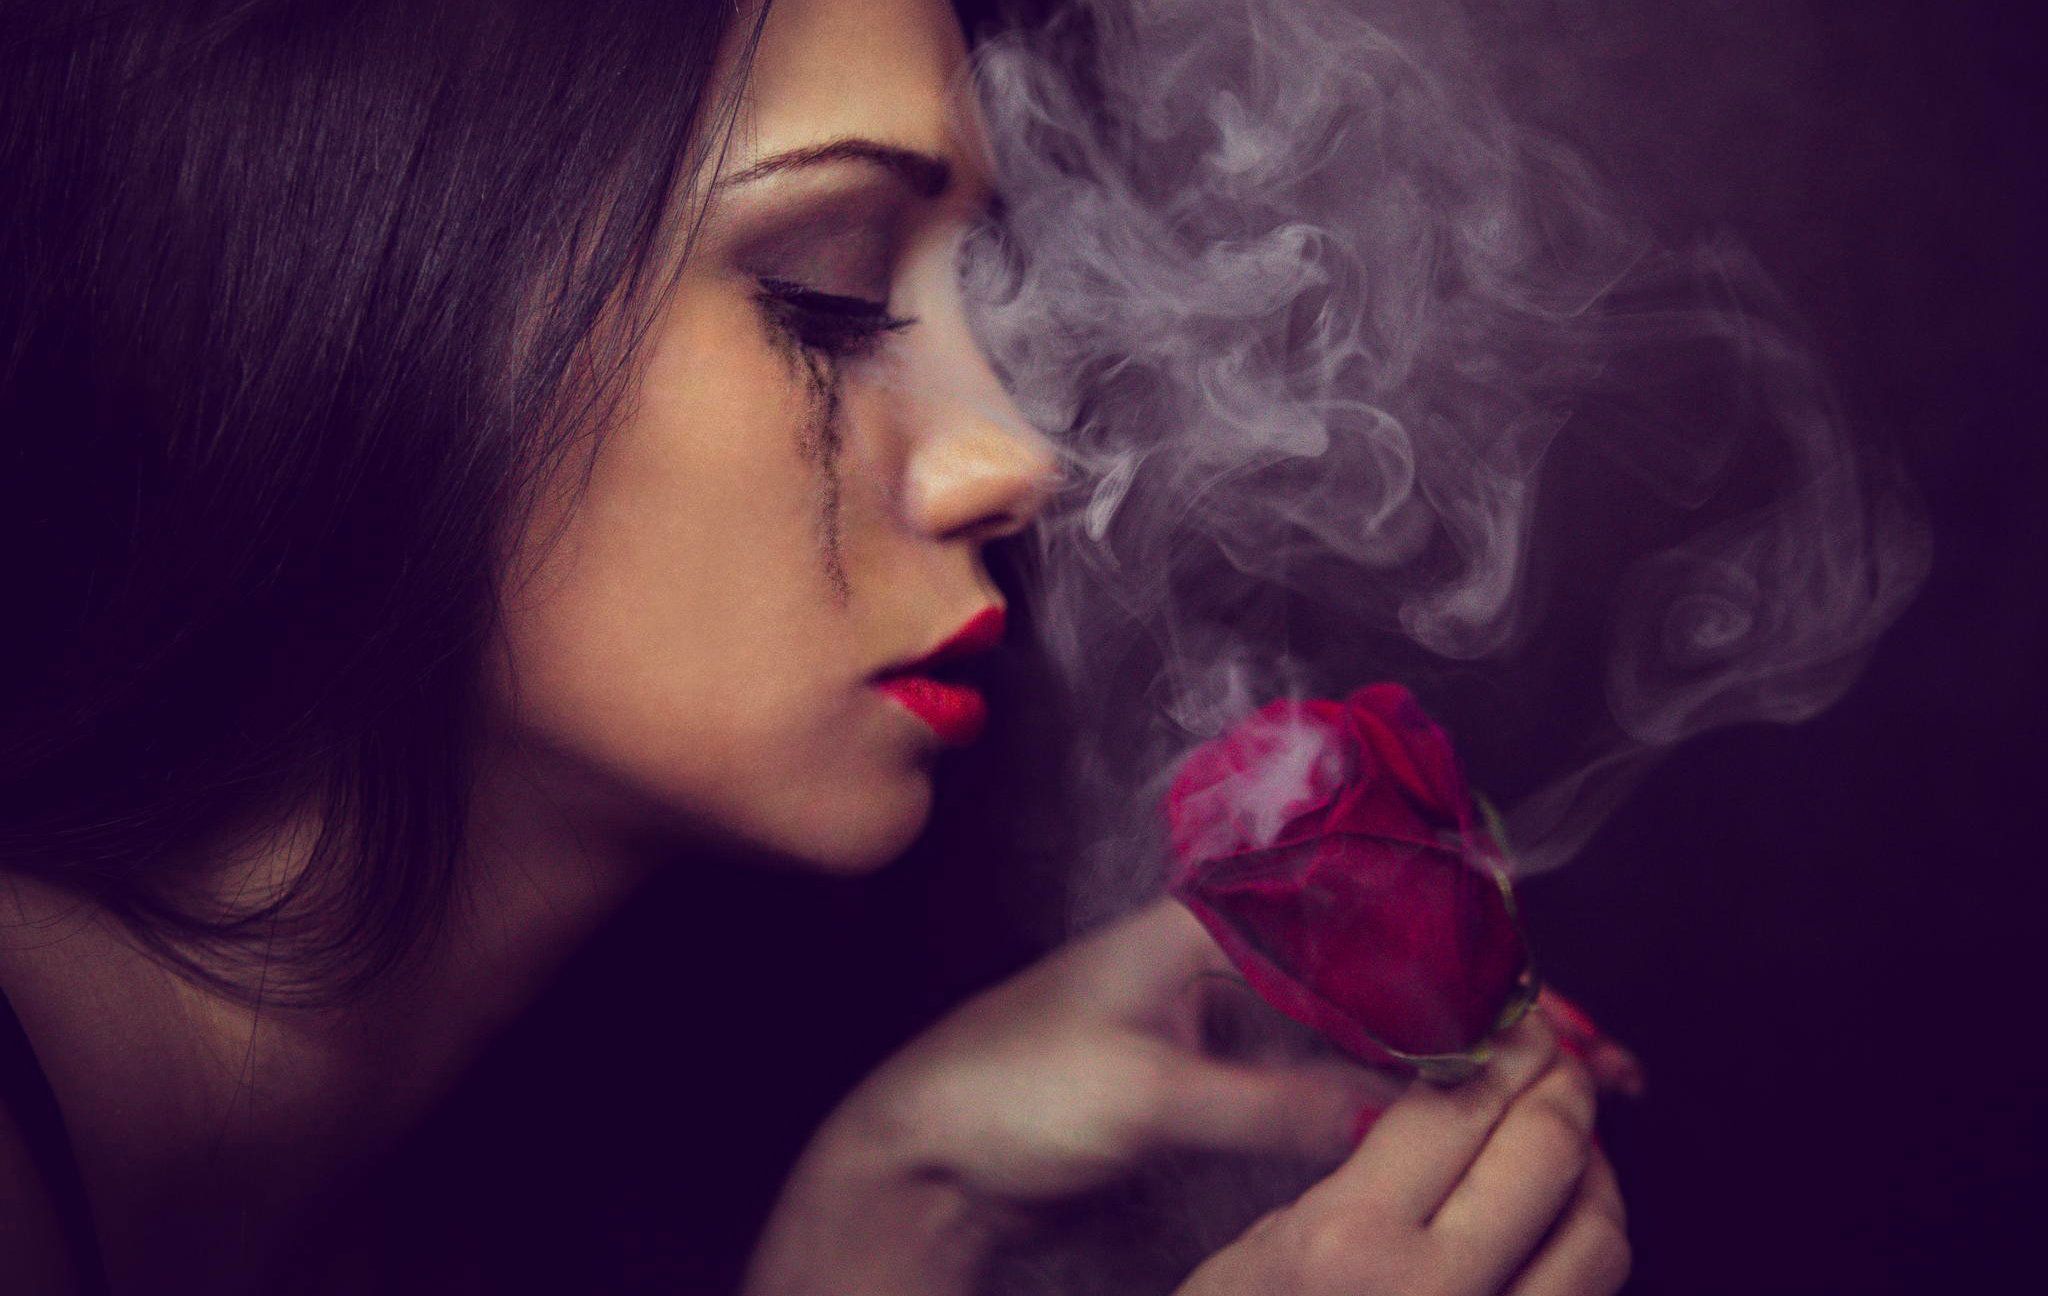 Smoking Girl Wallpapers posted by Christopher Walker.